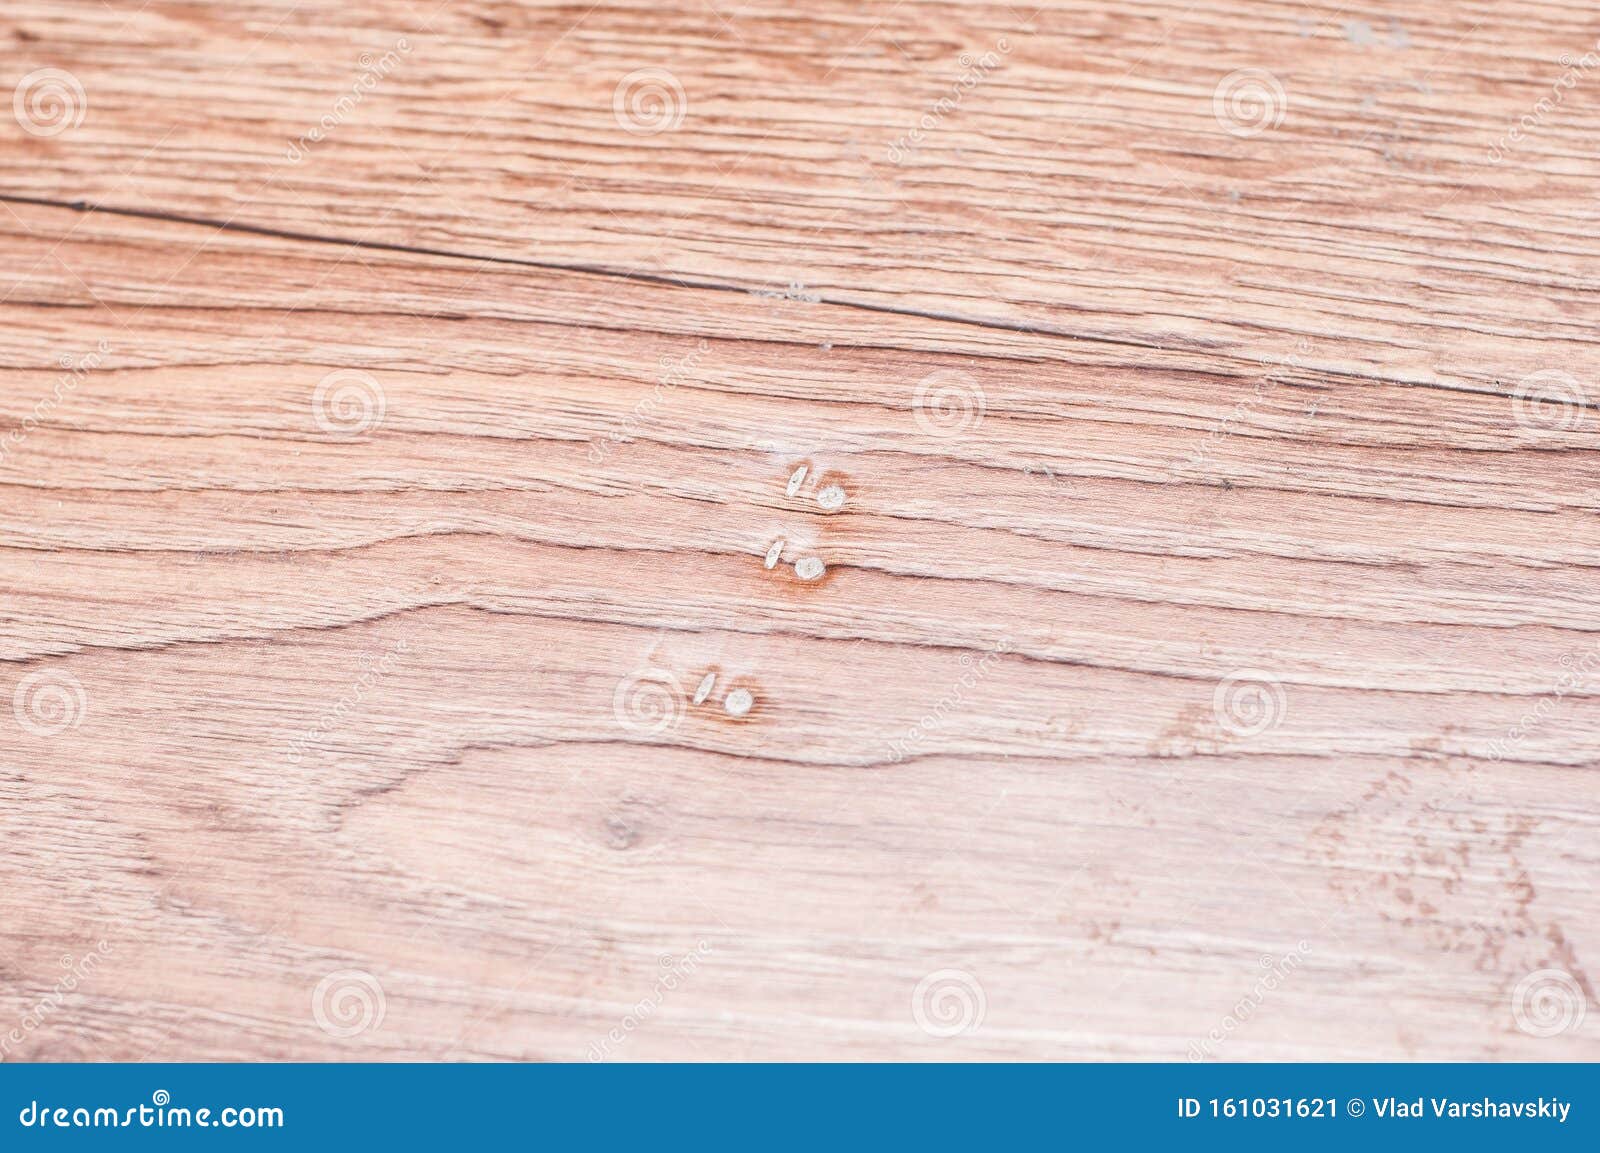 Damaged Linoleum After Repair Dents That Remain Stock Image